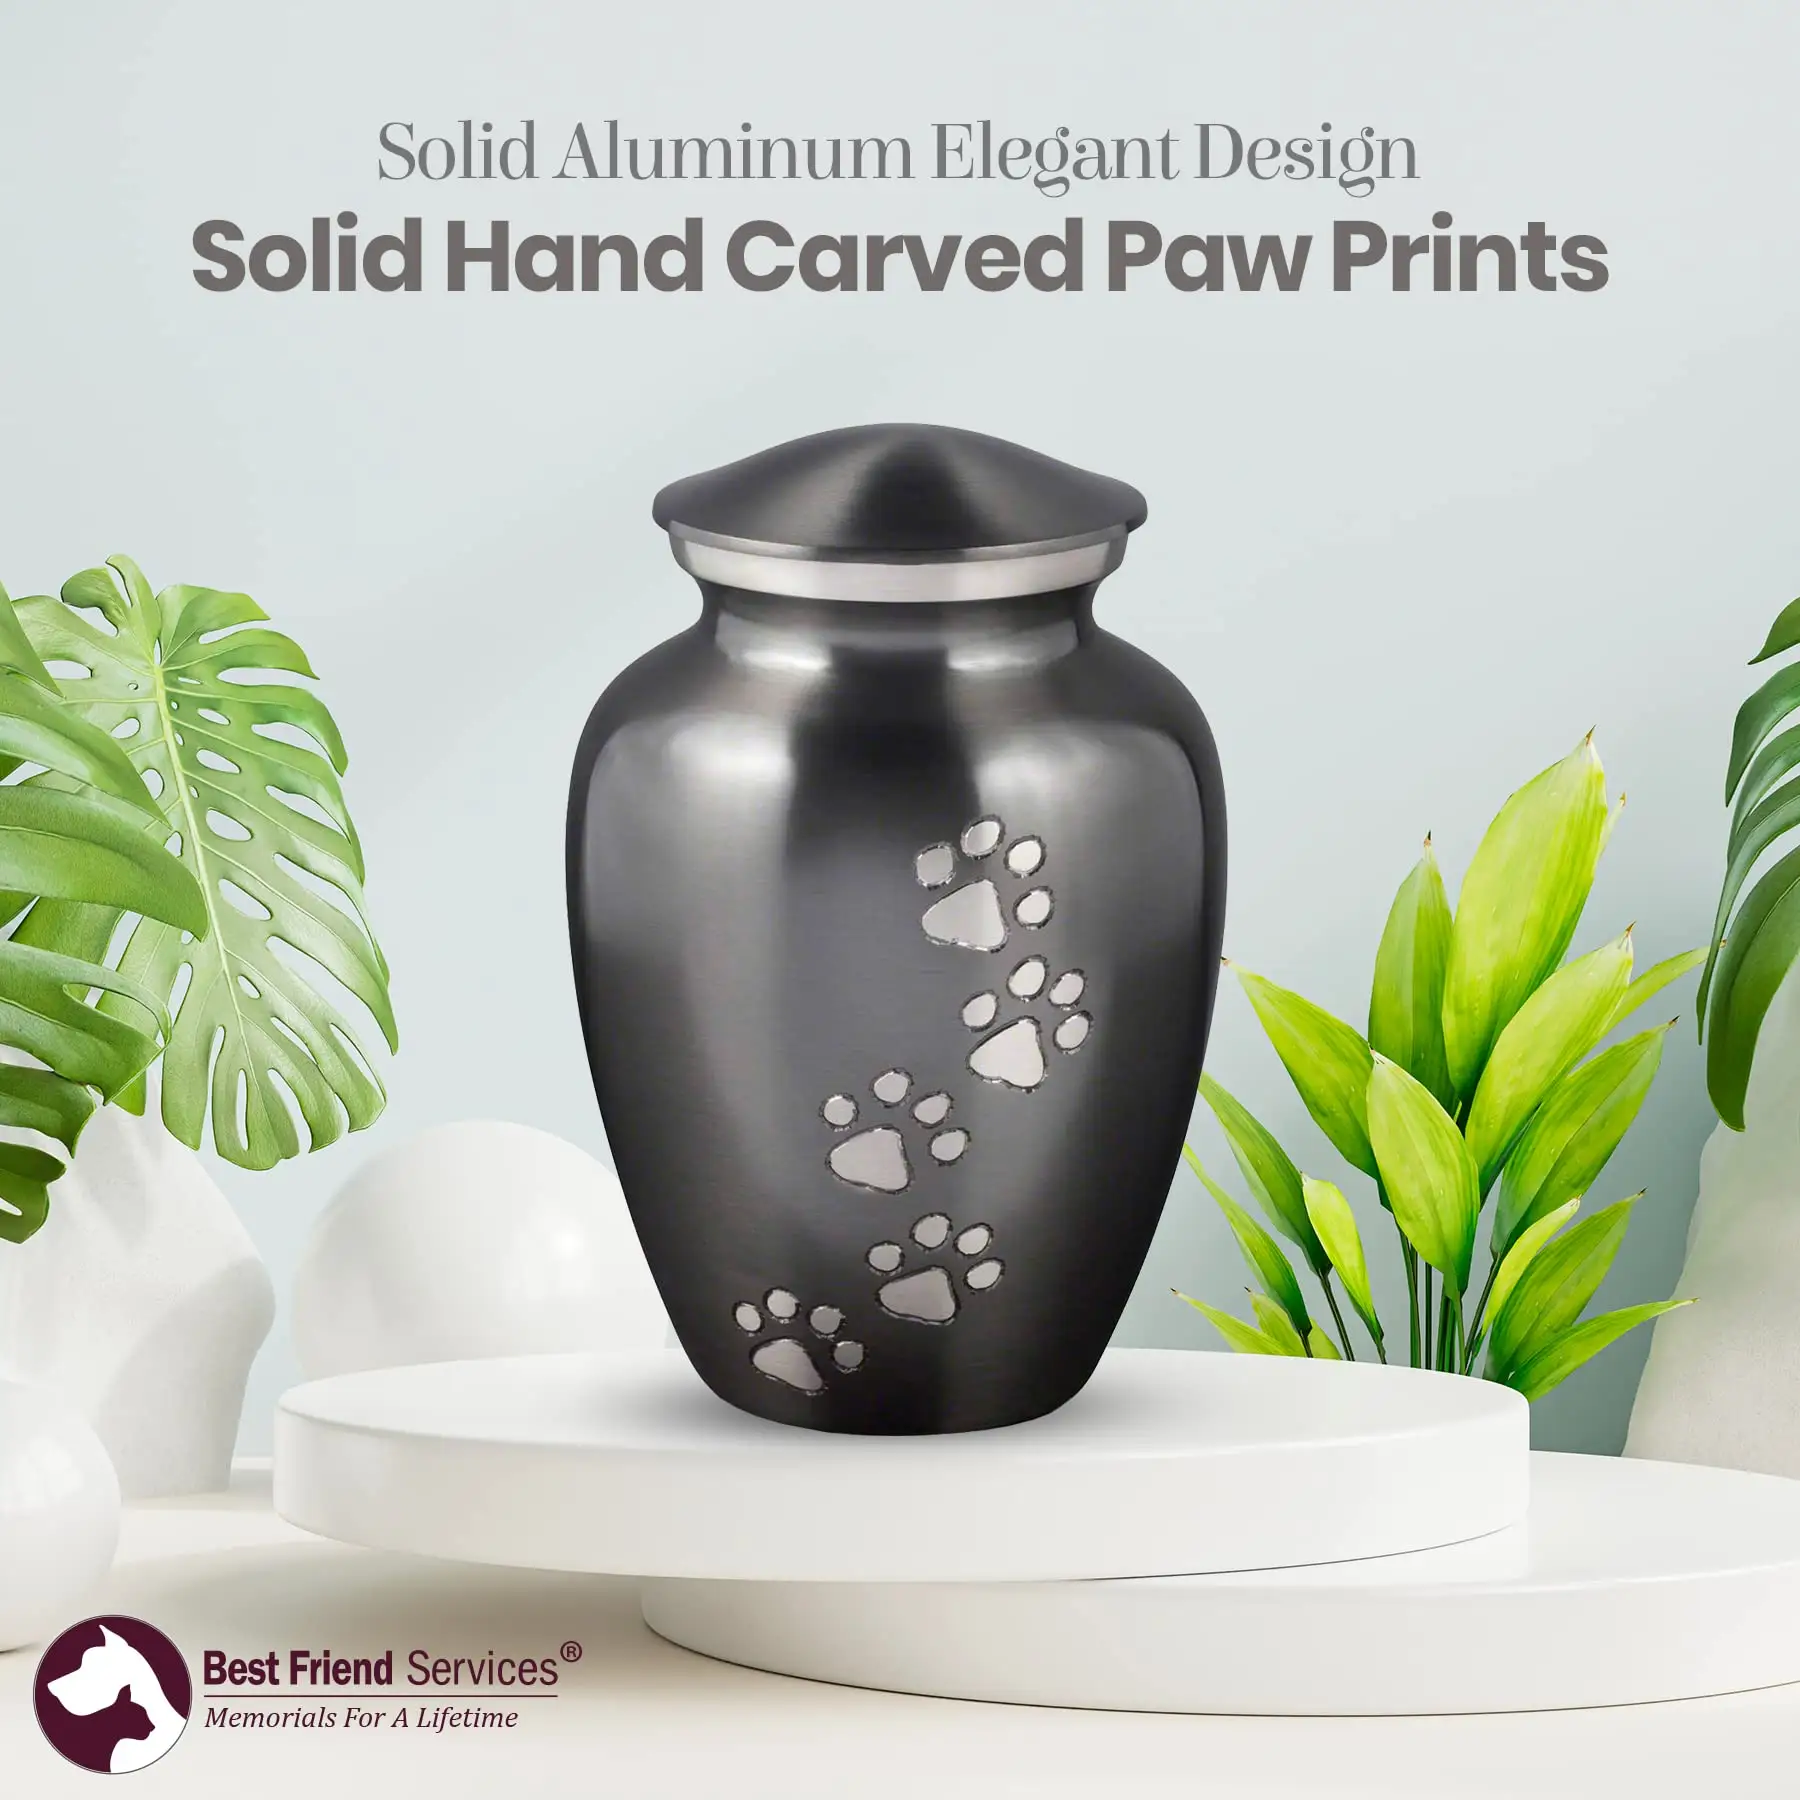 Petdom Pet Cremation Urns And Metal Memorial Cat Dog Pet Urns For Ashes